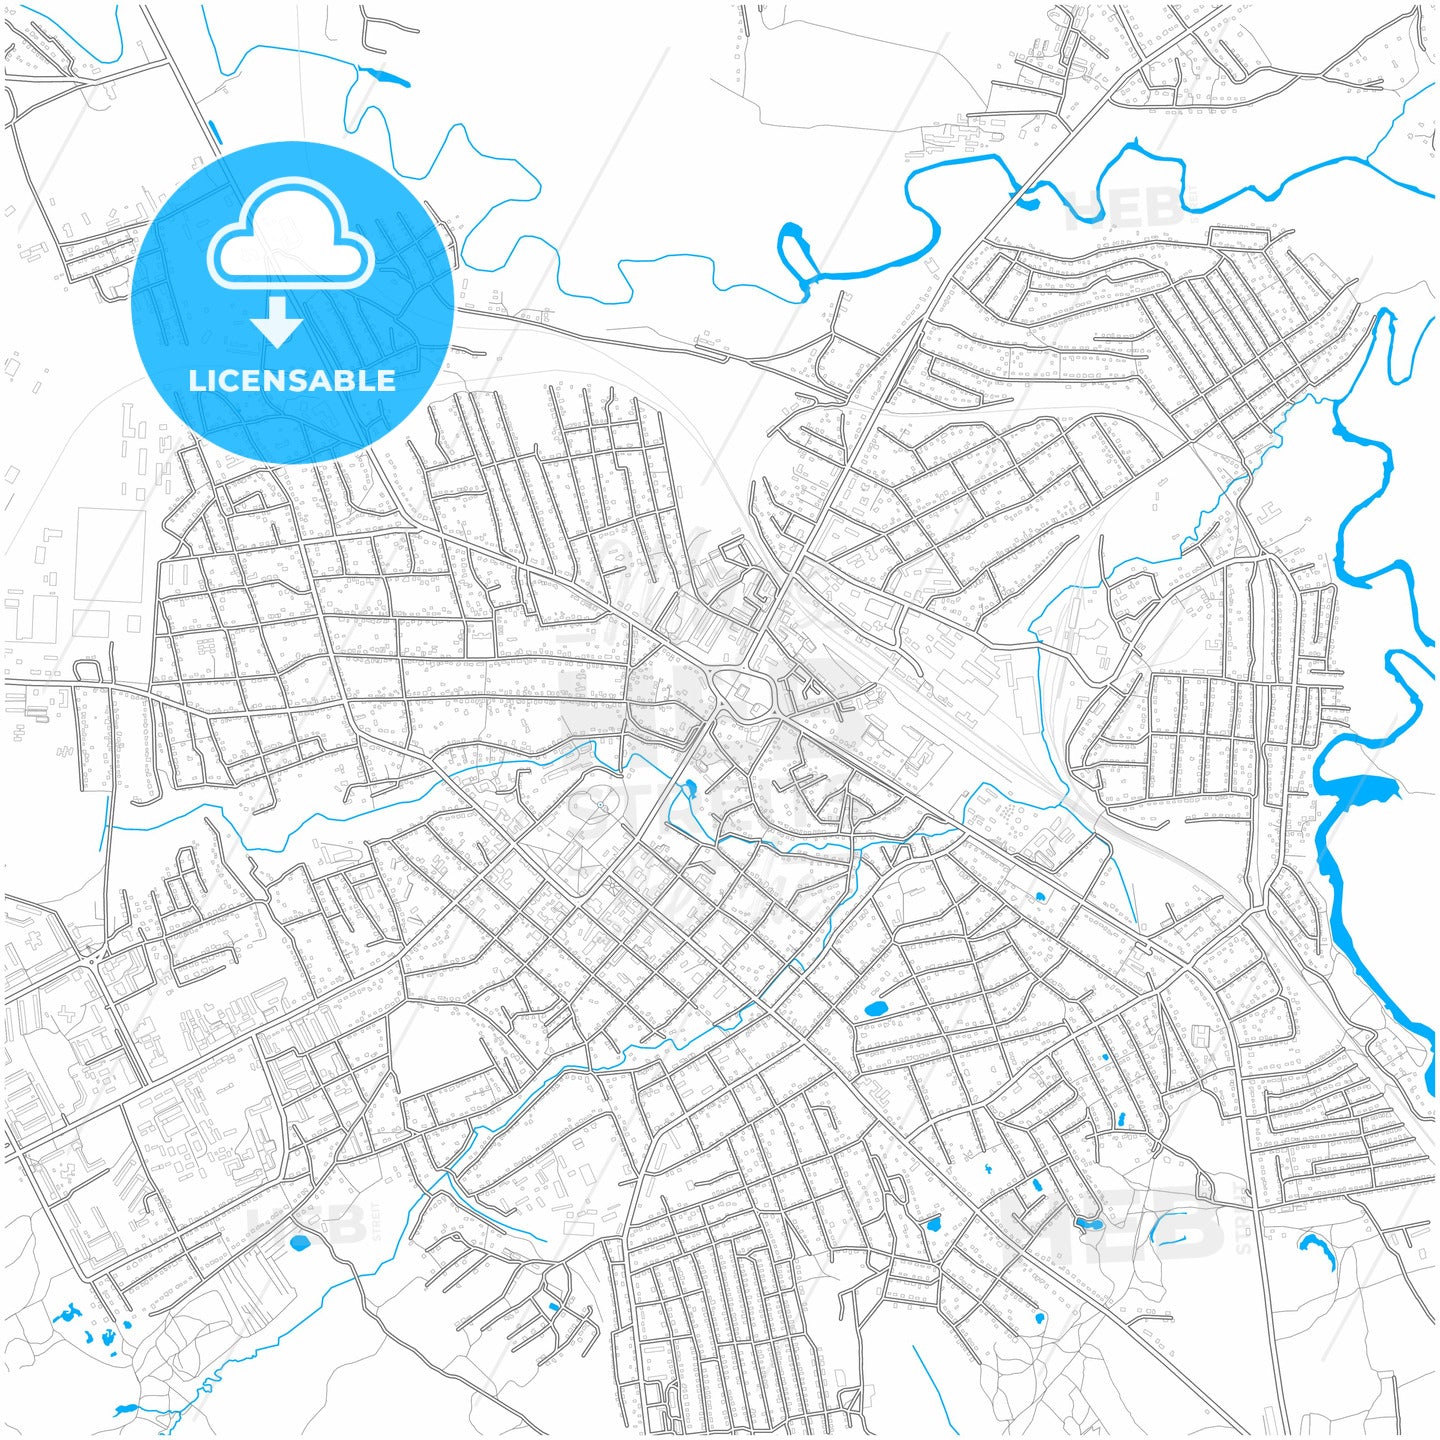 Roslavl, Smolensk Oblast, Russia, city map with high quality roads.